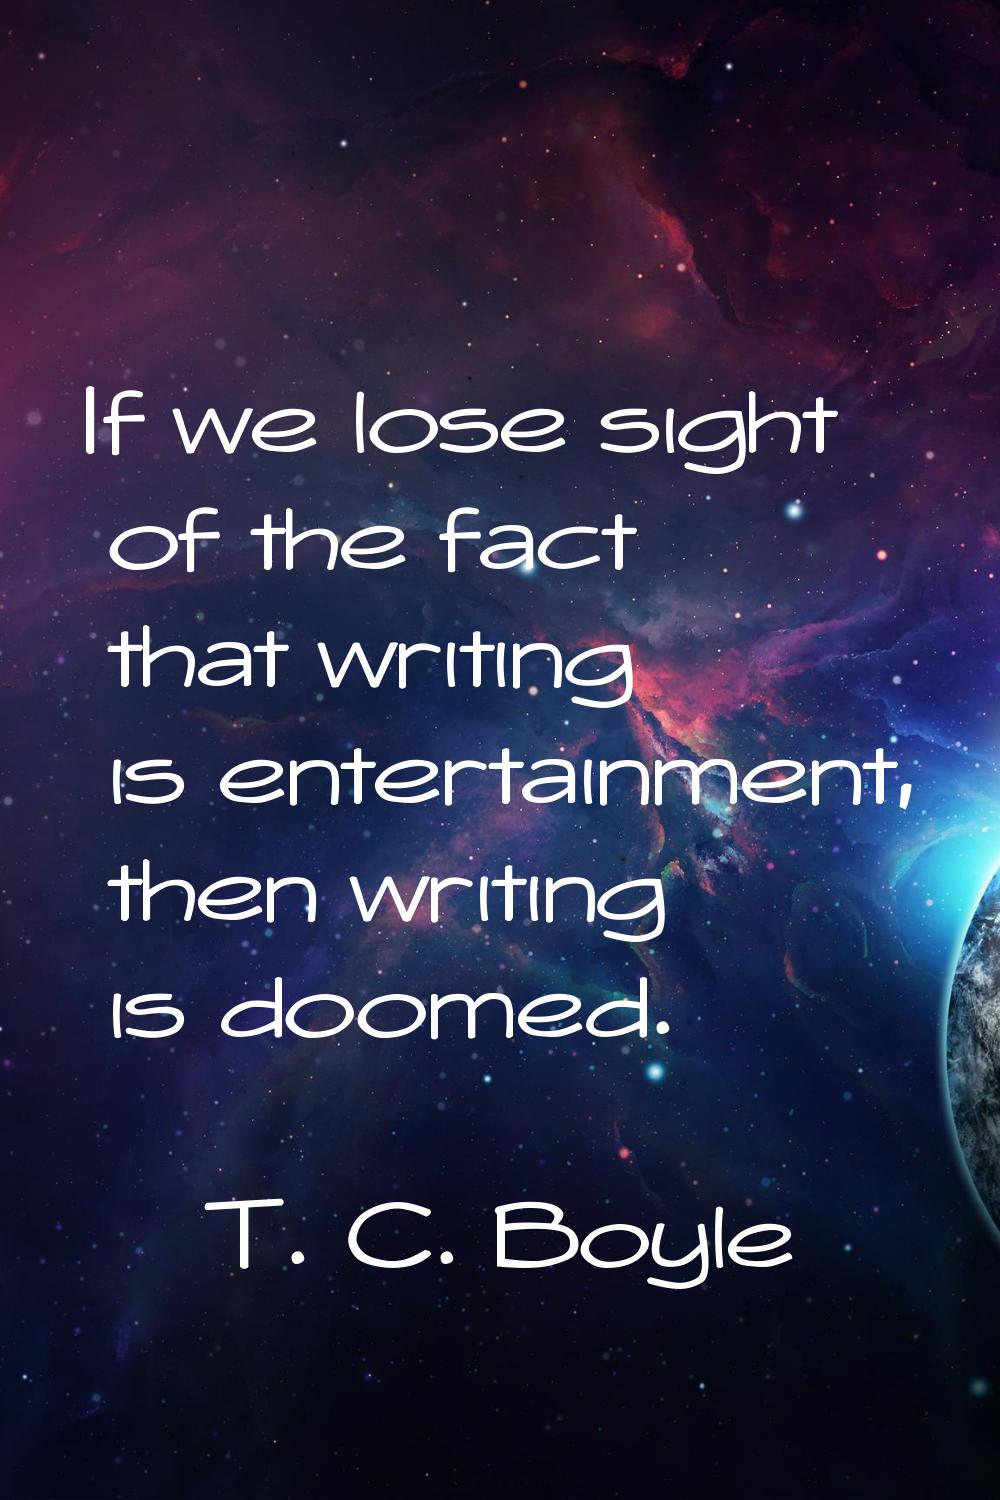 If we lose sight of the fact that writing is entertainment, then writing is doomed.